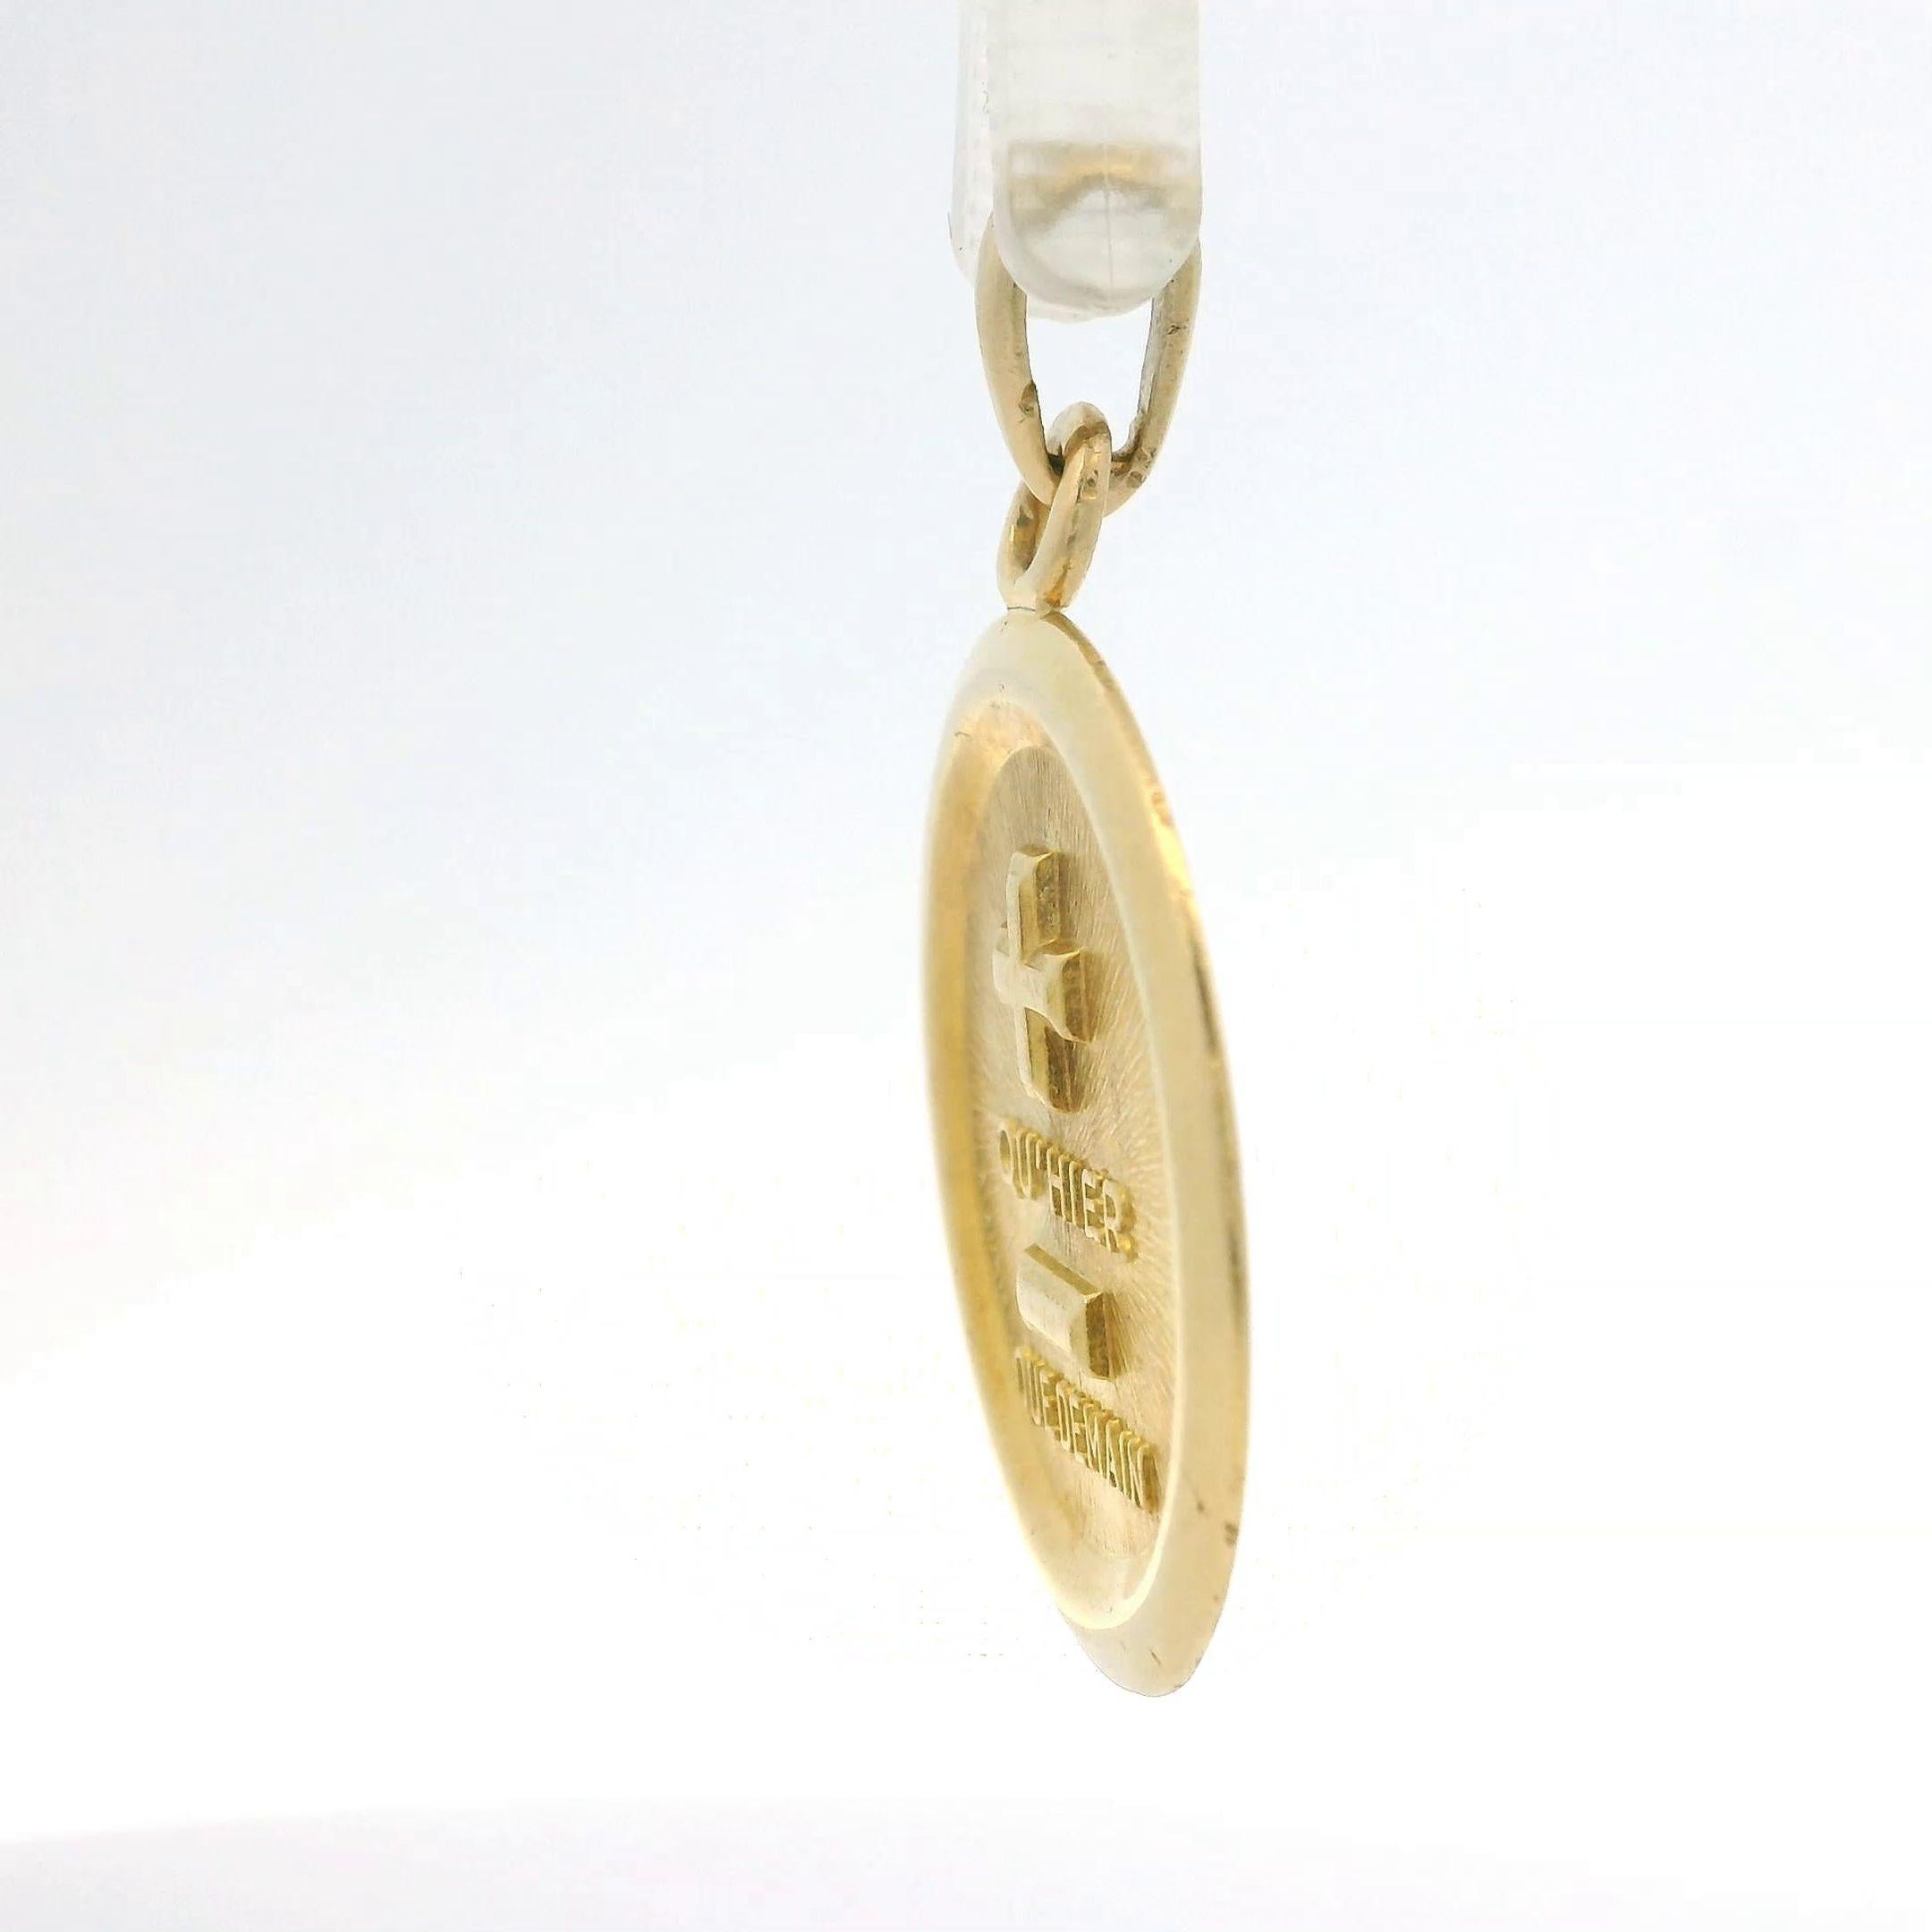 Material: Solid 18k Yellow Gold
Weight: 5.73 Grams
Chain Type: Not Included
Bail Dimensions: 5x2.8mm (approx. - inside)
Pendant Diameter: 23.4mm (0.92